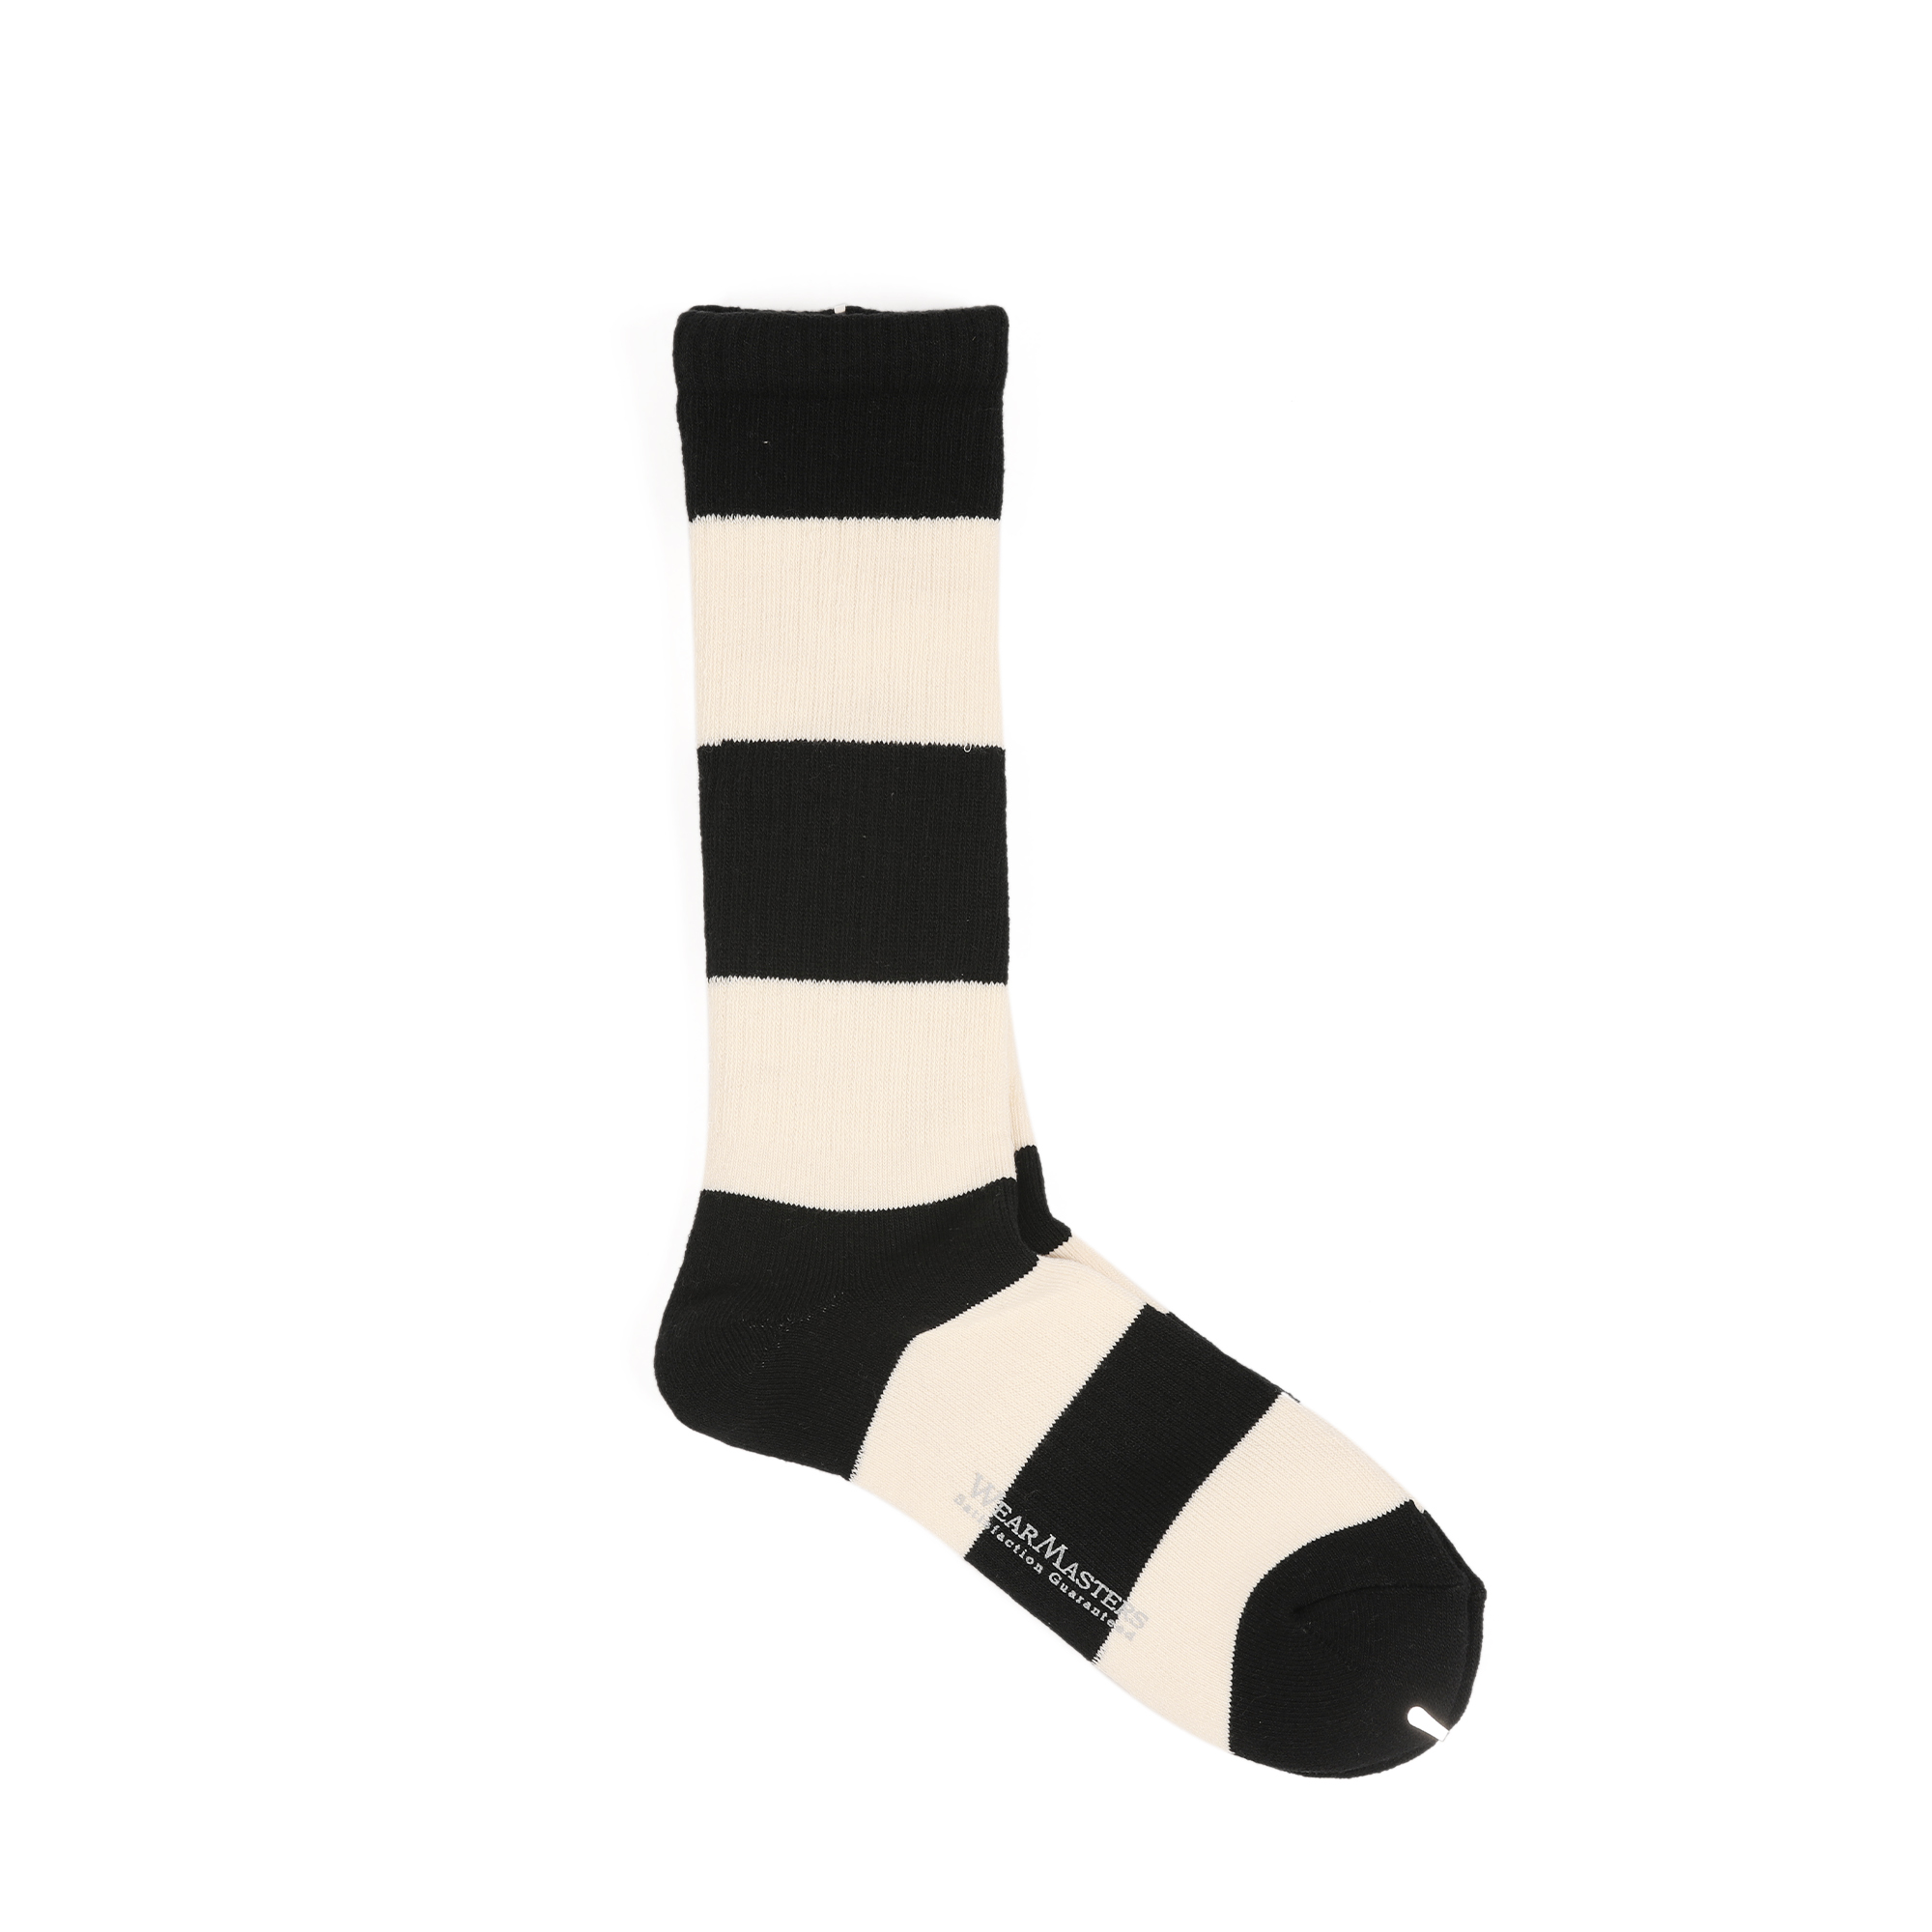 Attractions - Lot.600 Boots Sox (Black & White Border)